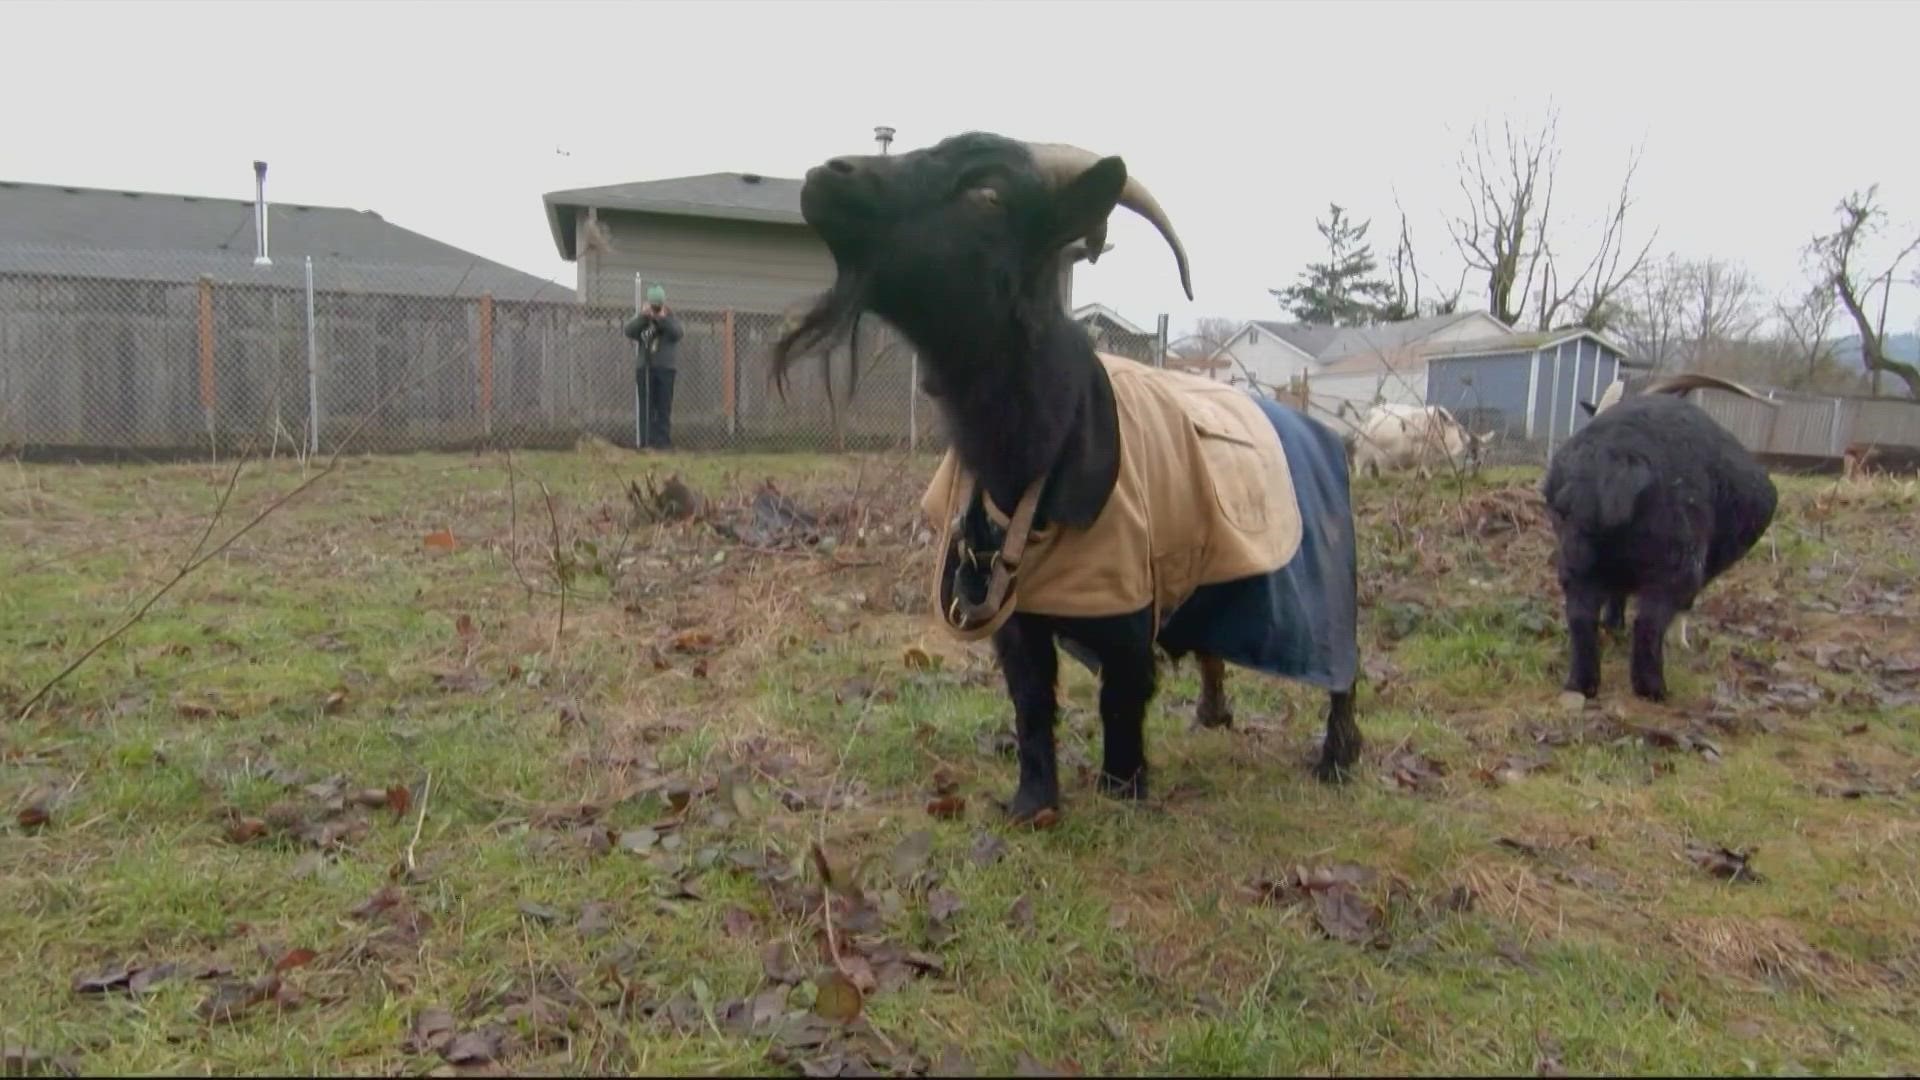 Clearing homeless camps and relocating the Belmont Goats was the first step in the city's plan to build the Peninsula Crossing Safe Rest Village